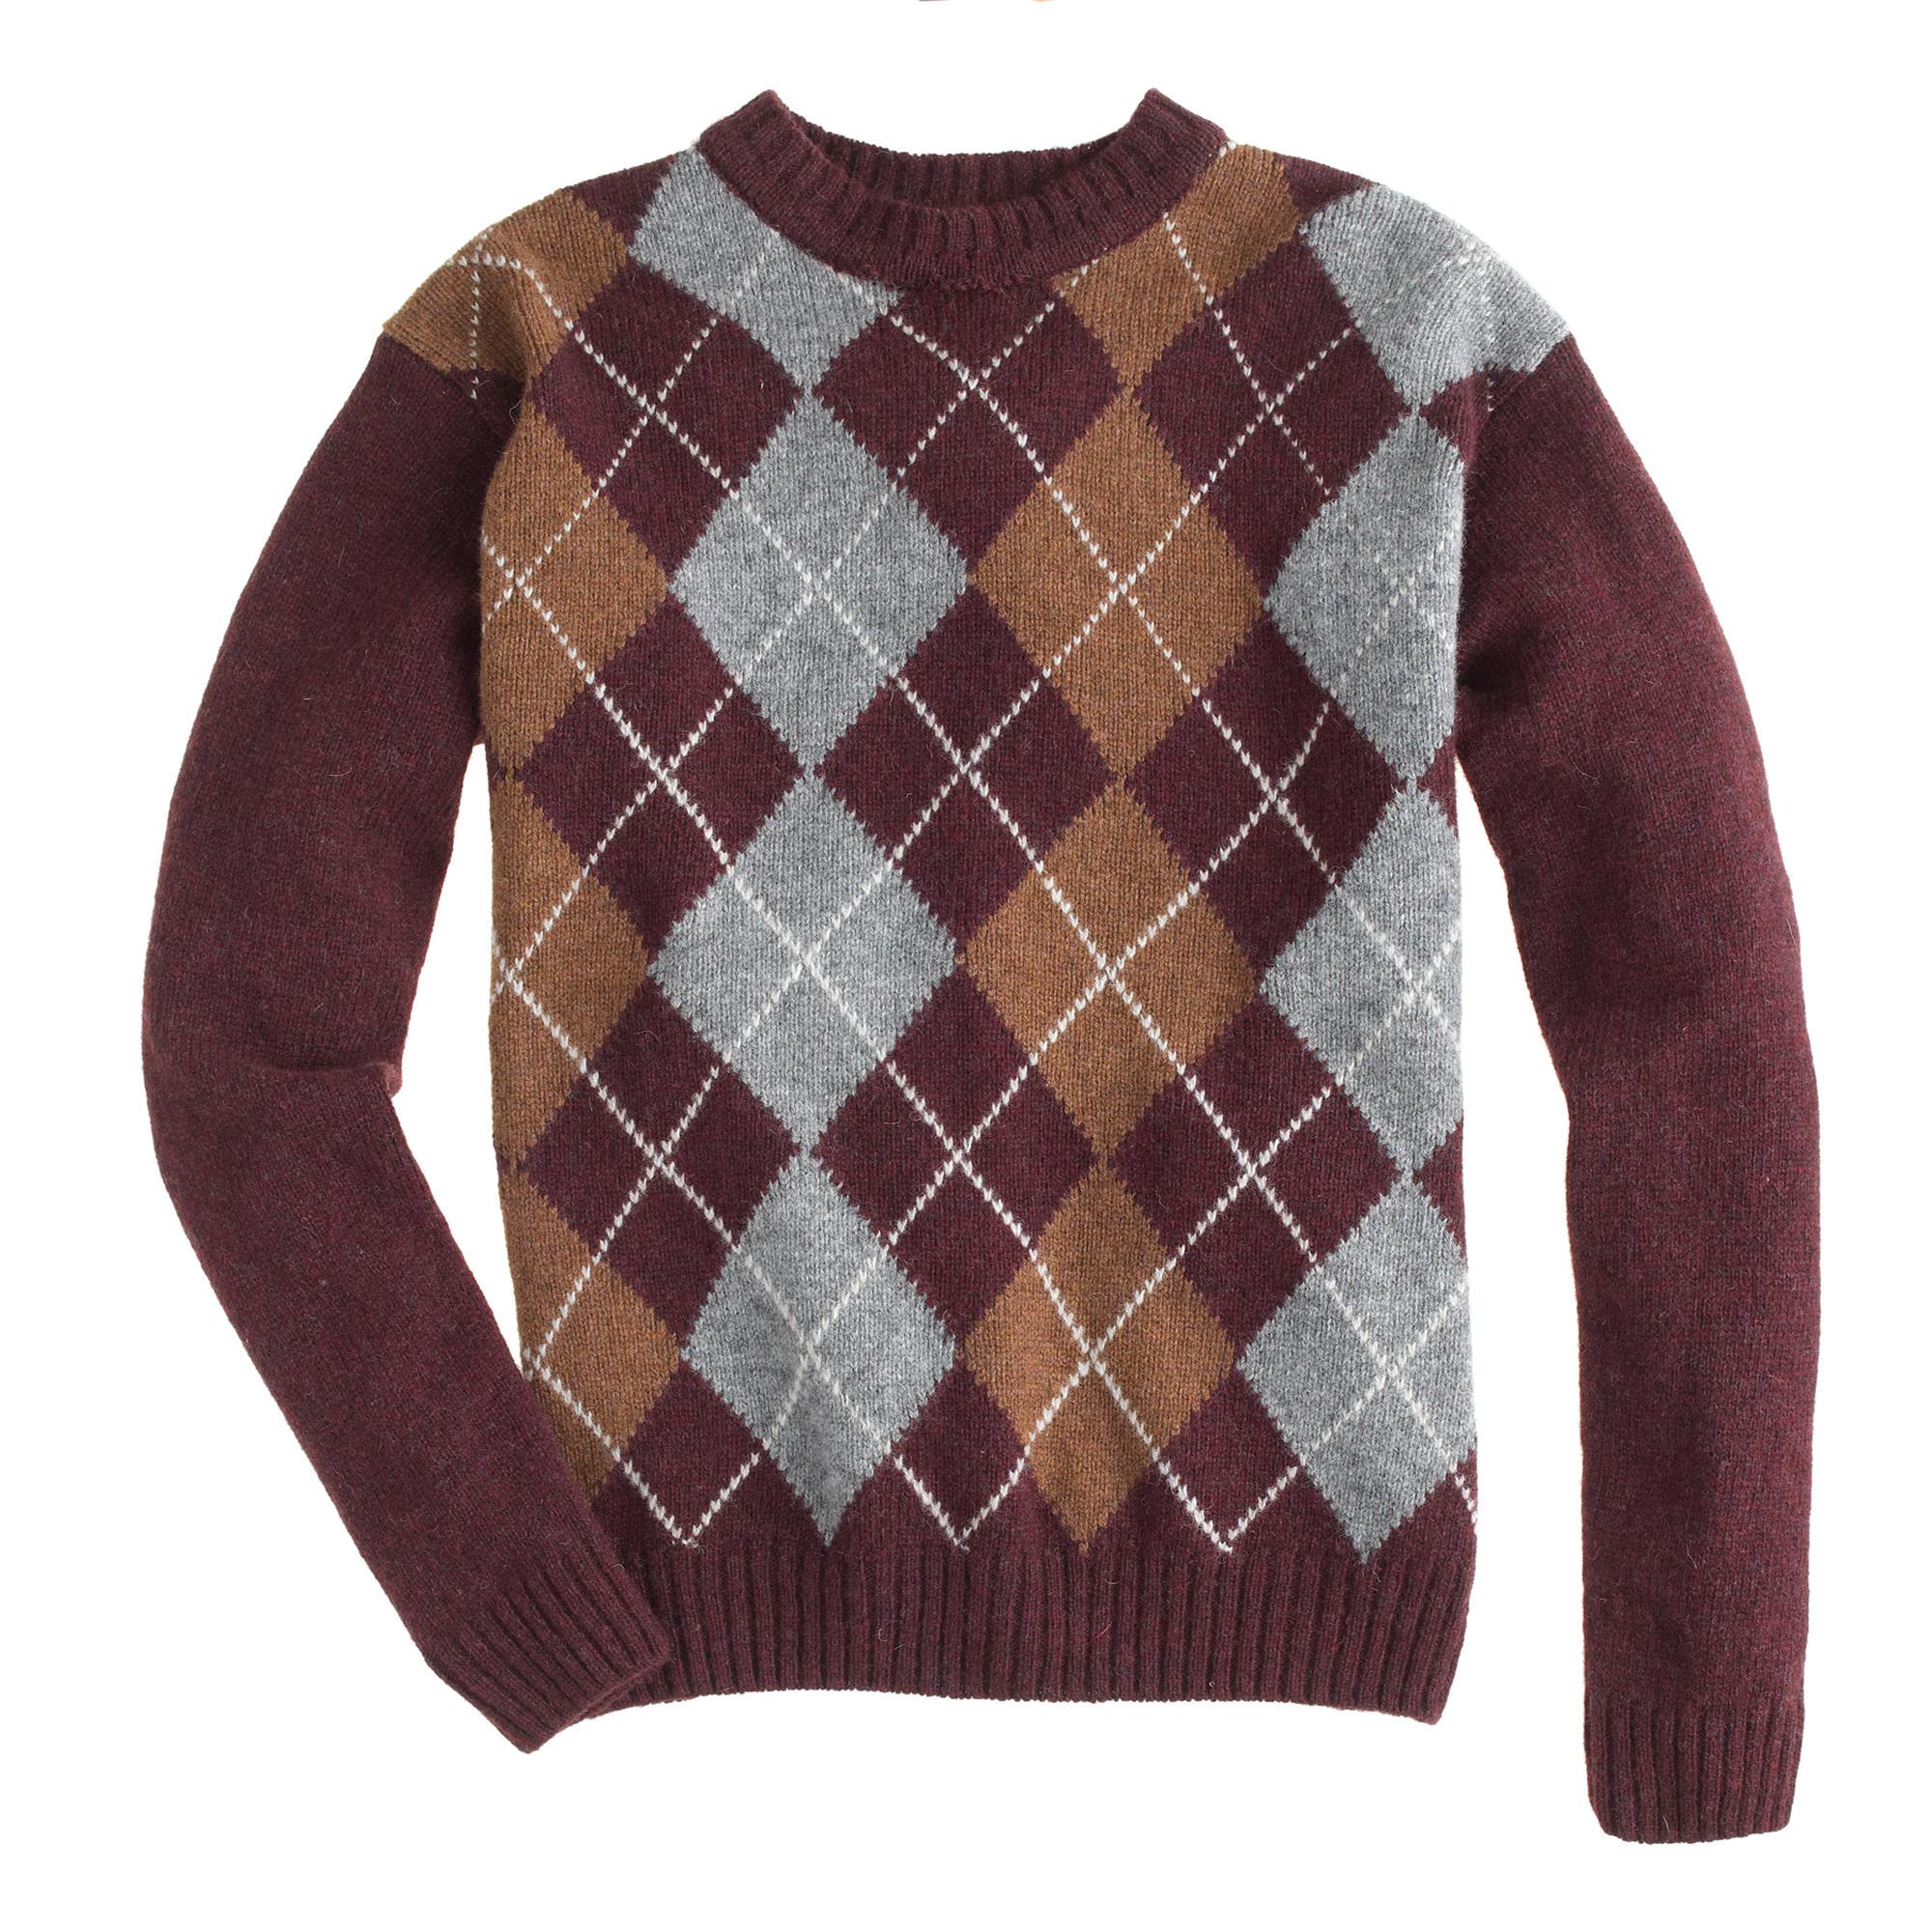 J.Crew Harley Of Scotland Argyle Sweater in Brown for Men - Lyst